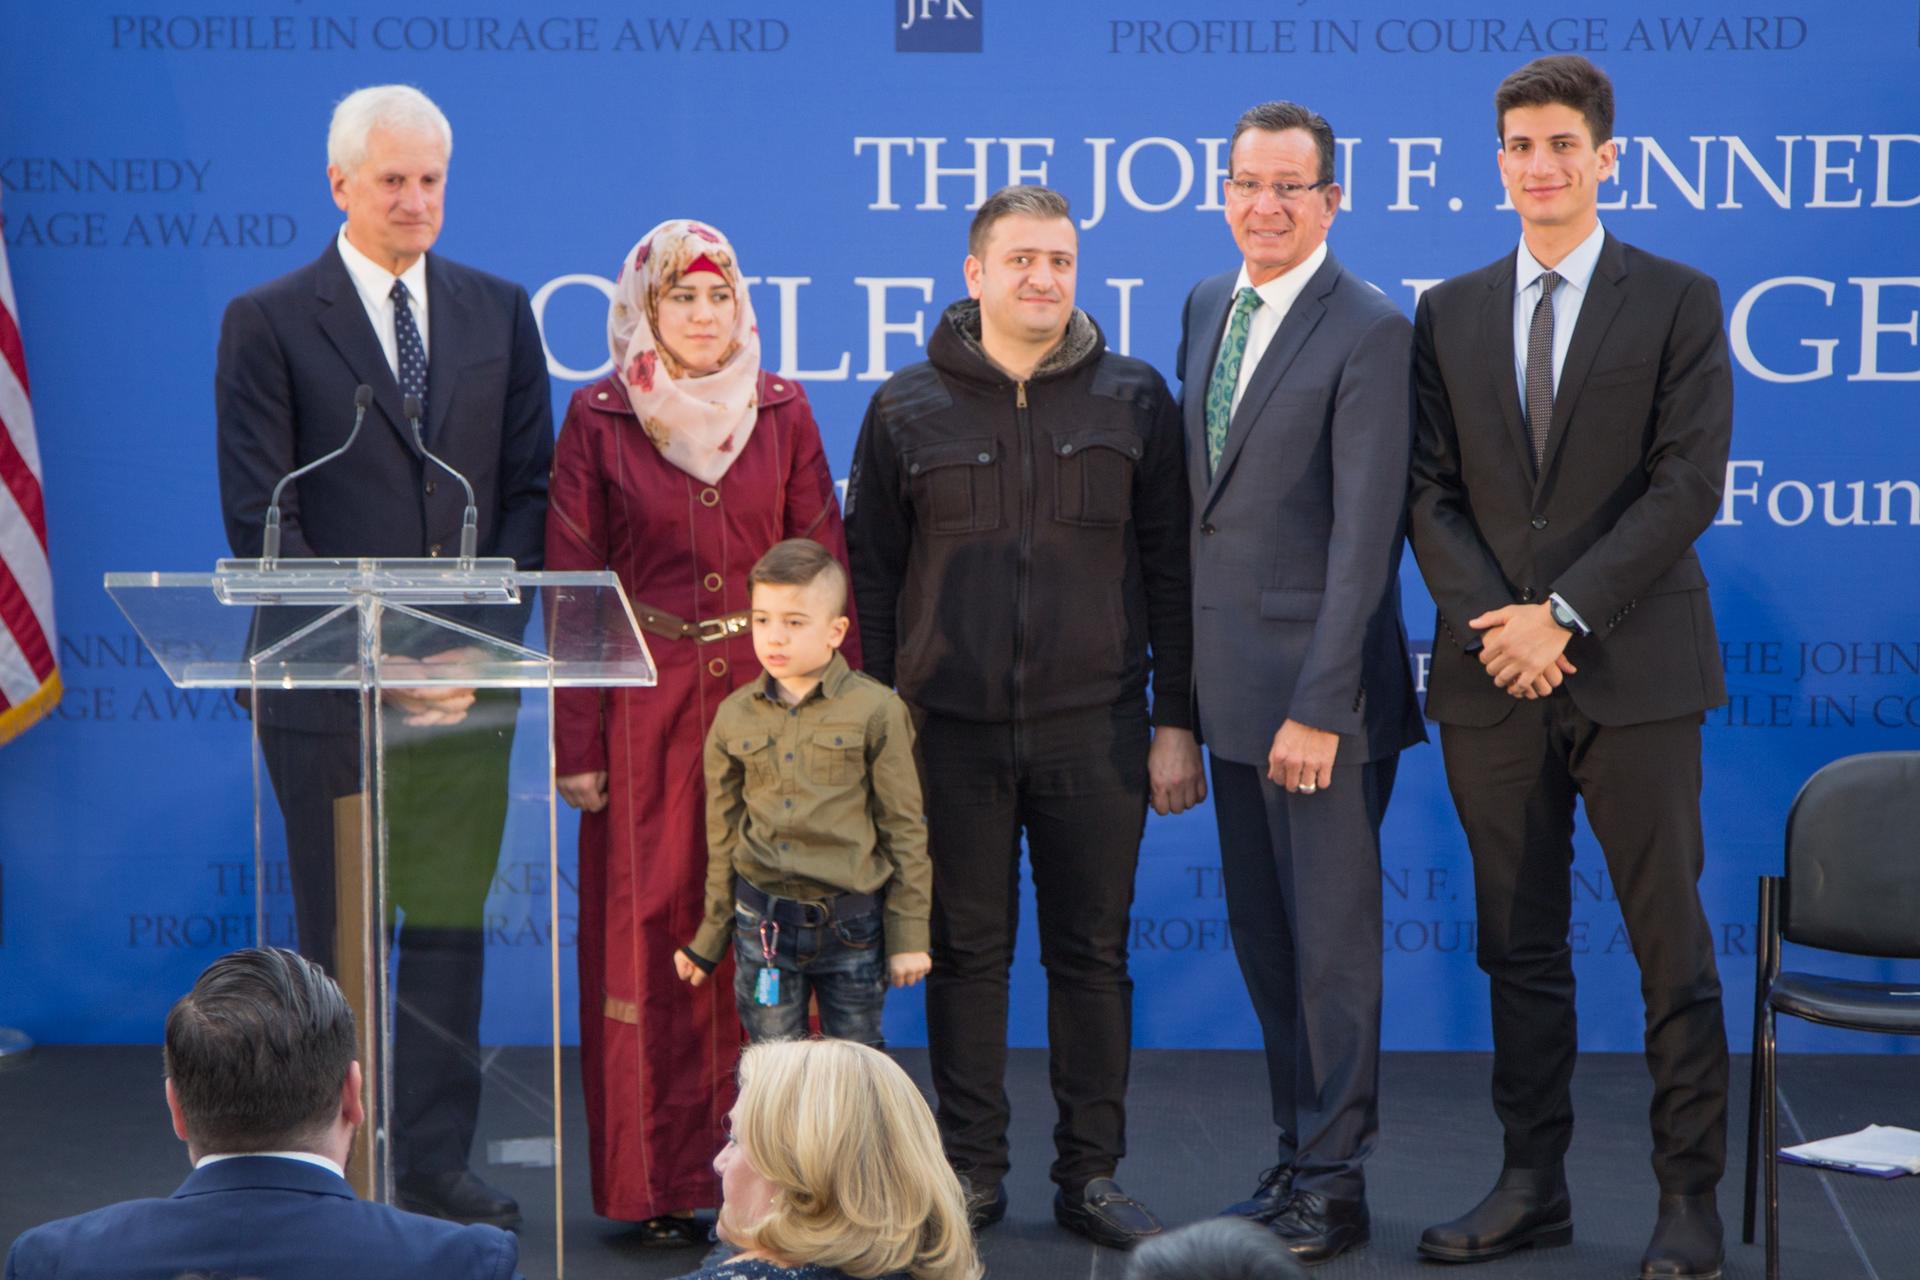 This Syrian couple and their 5 year old son lauded Gov. Dannel Malloy (second from right) for personally welcoming them to Indiana last November. The family is withholding their last name due to concerns about the safety of relatives back in Syria.